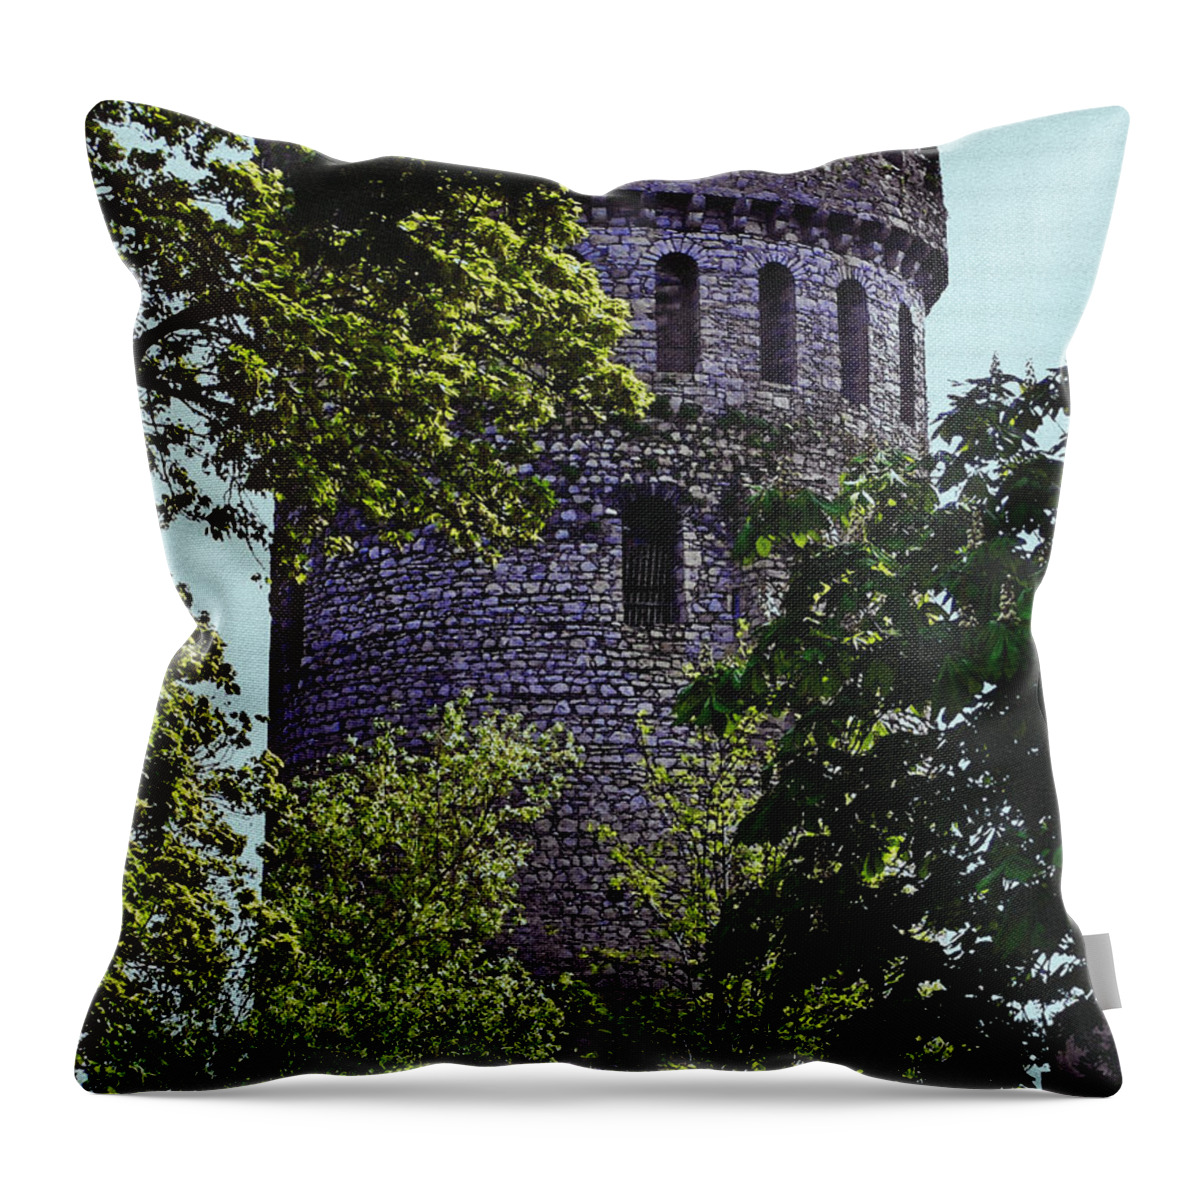 Nenagh Throw Pillow featuring the painting Nenagh Castle Ireland by Teresa Mucha